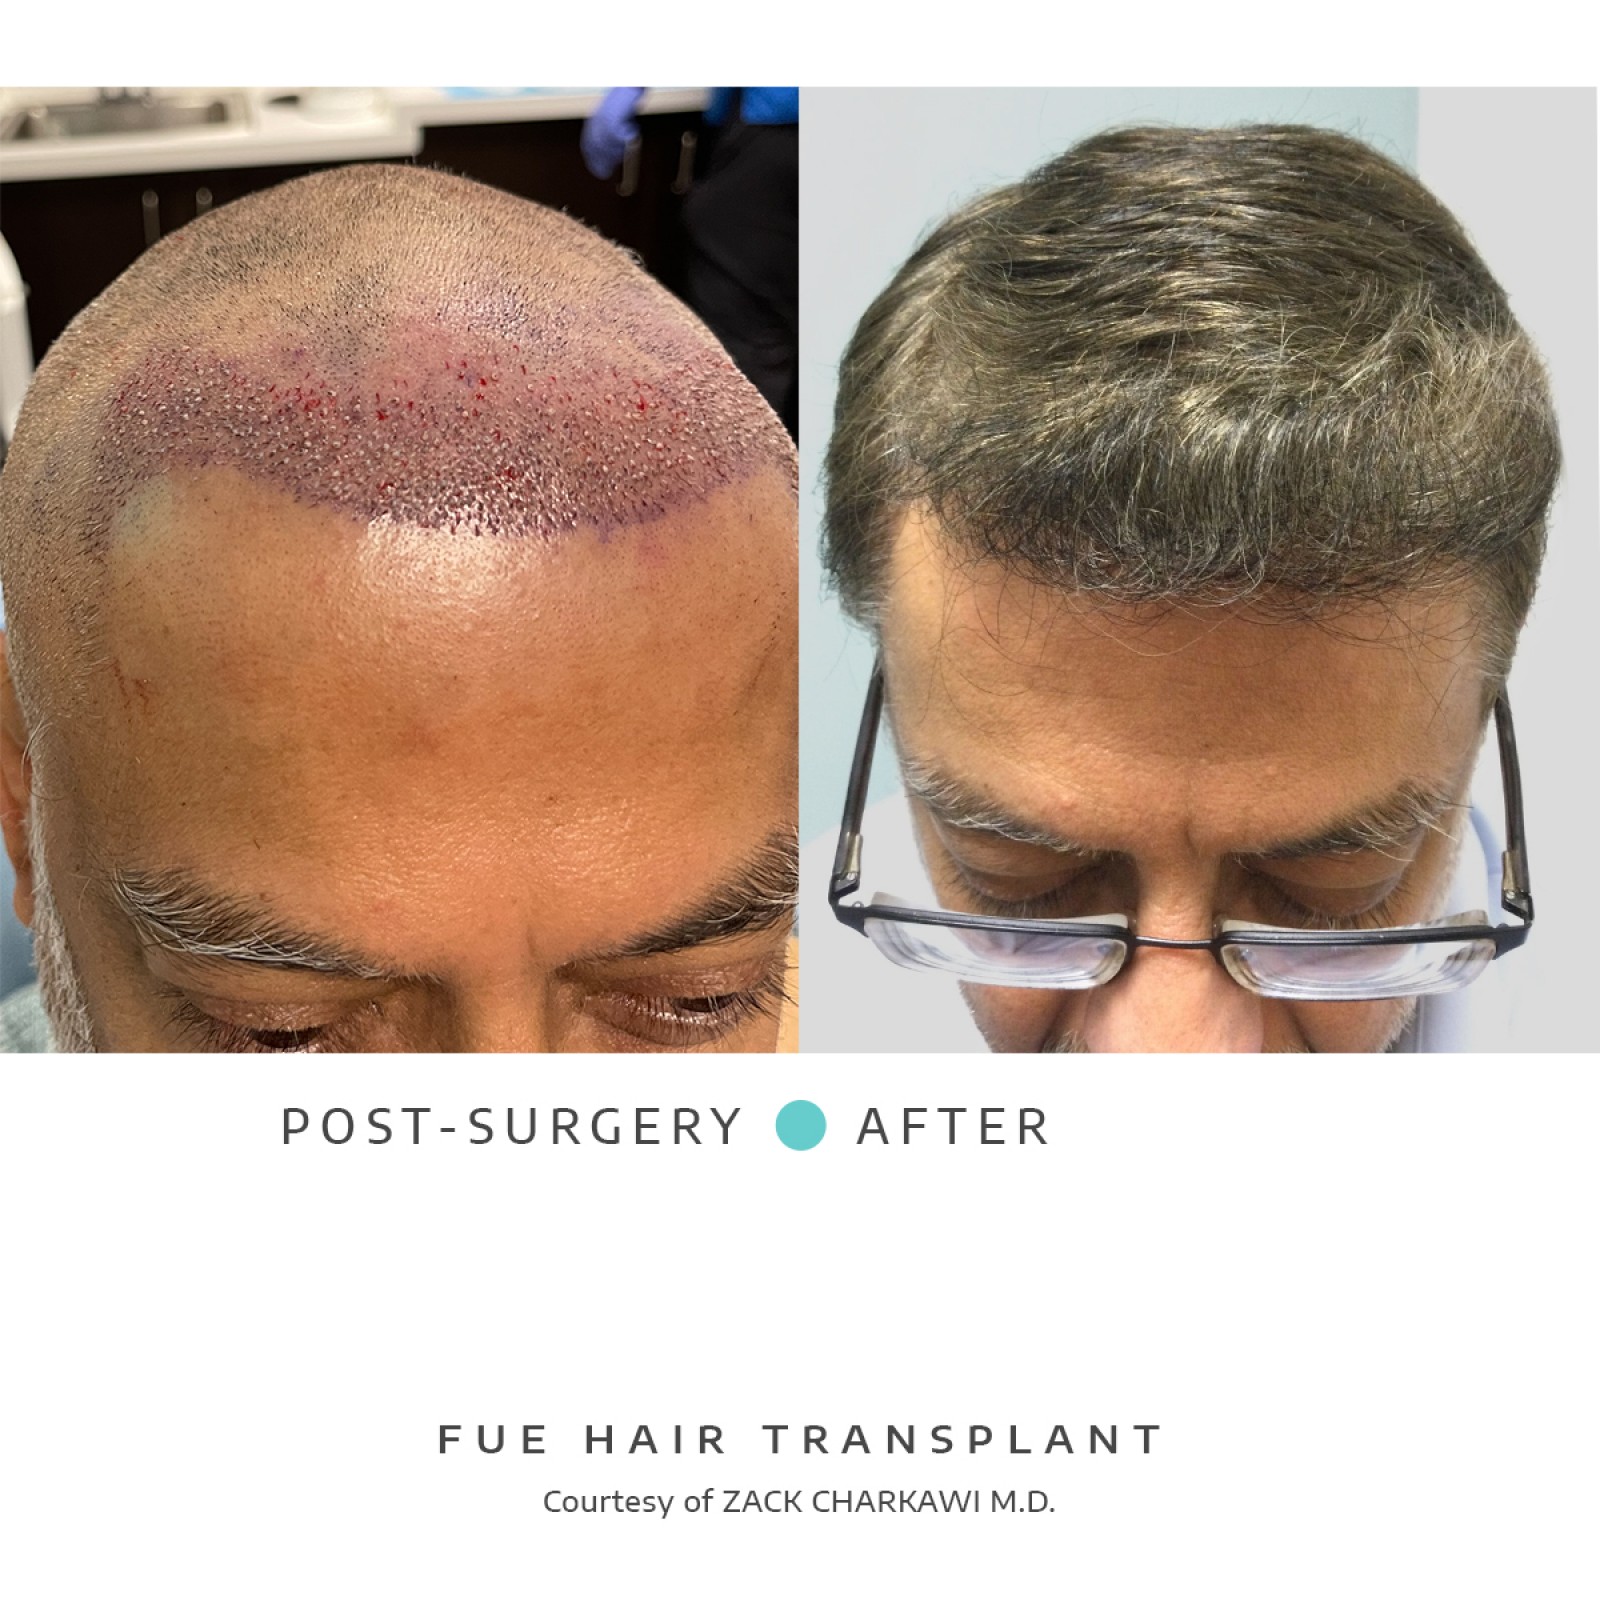 The before image shows a close-up of a man's scalp with hair loss. The left image reveals the freshly transplanted area after a hair transplant, with lush, natural-looking hair concealing previous bald patches.